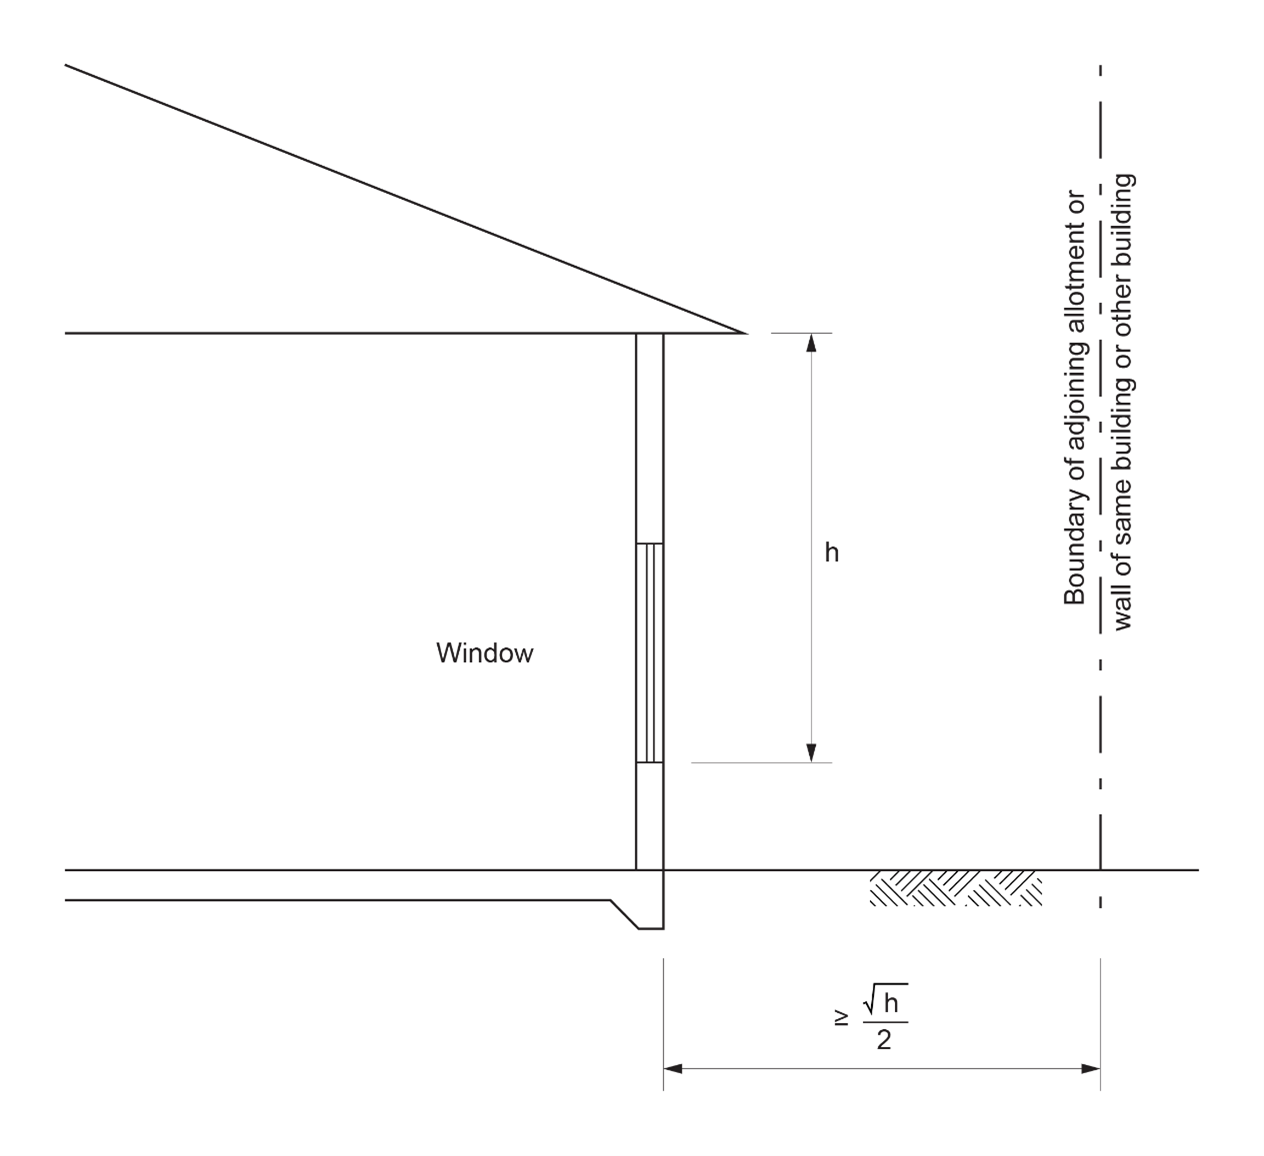 Figure F6D3b: Elevation showing method of measuring distance of window from boundary